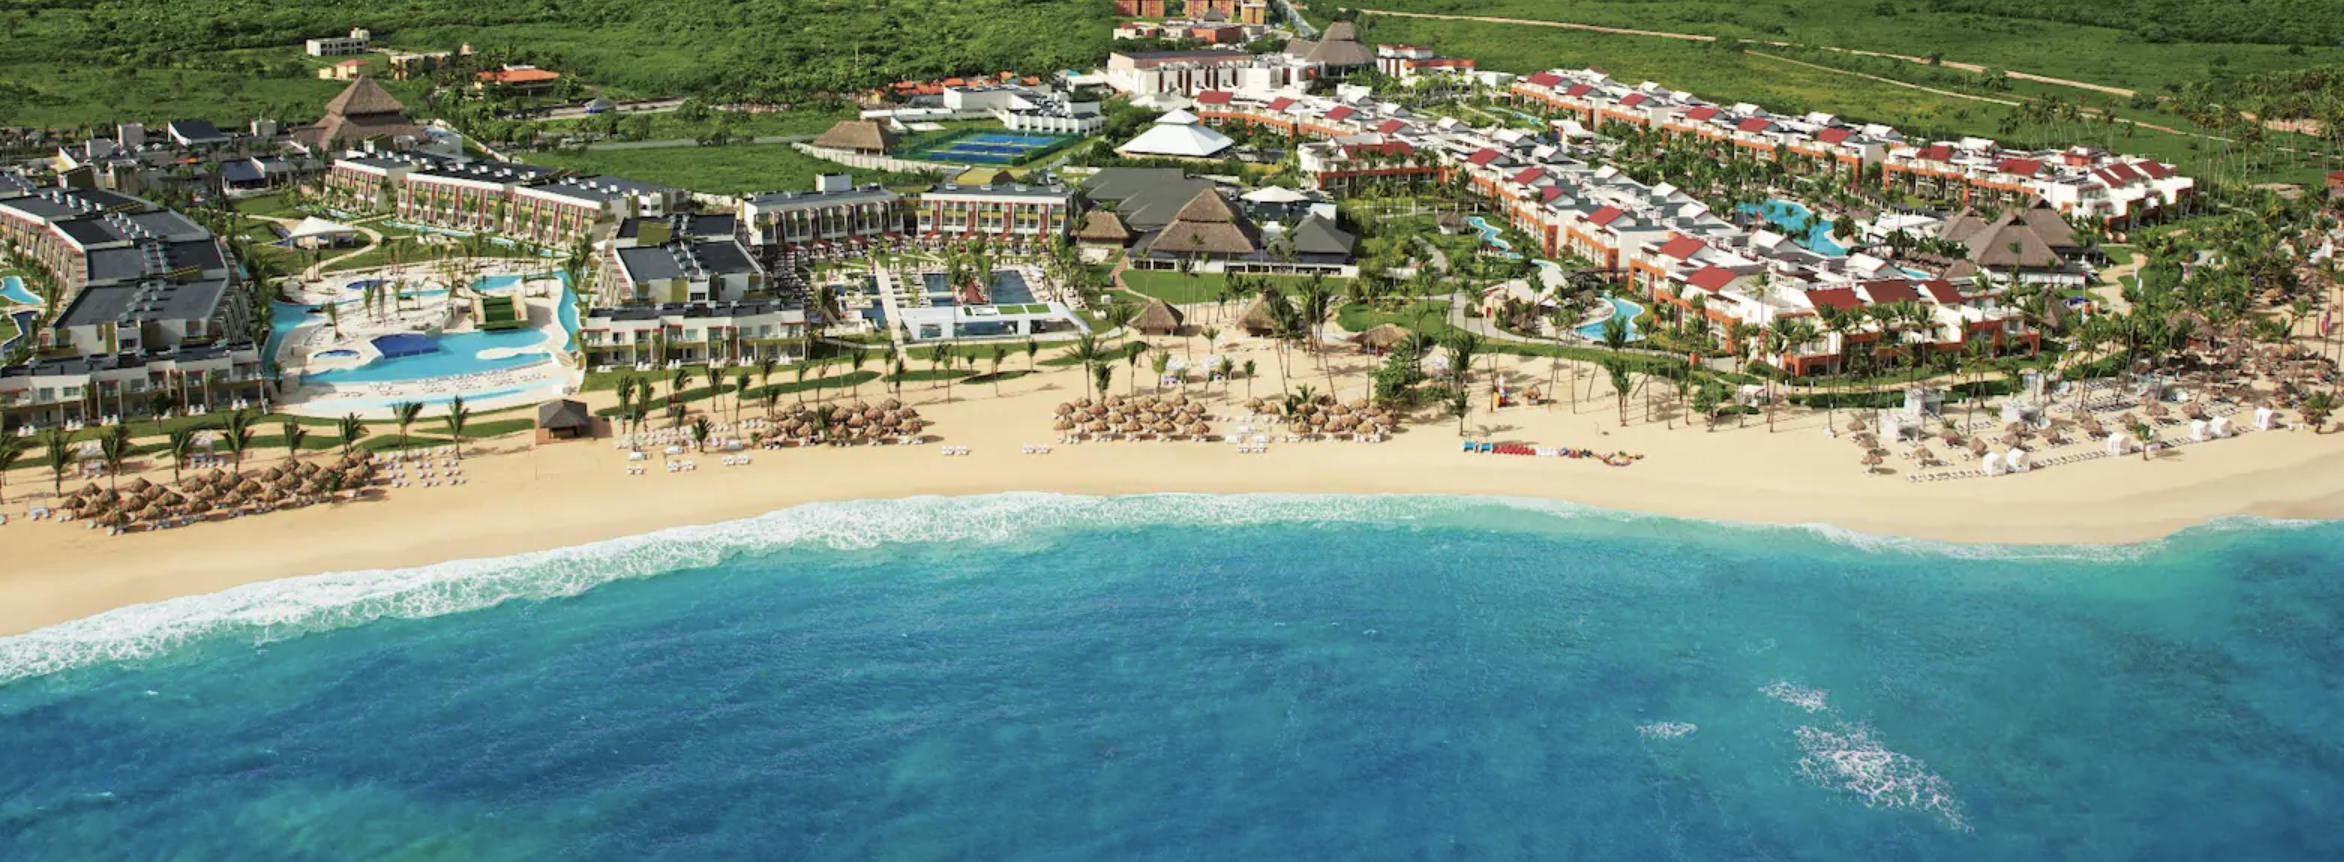 Plan a getaway at our incredible all-inclusive resort in Punta Cana that is set on the palm-fringed Uvero Alto beach between the rainforest and the ocean. A luxury retreat perfect for families or couples, Dreams® Onyx Resort & Spa offers 806 elegant